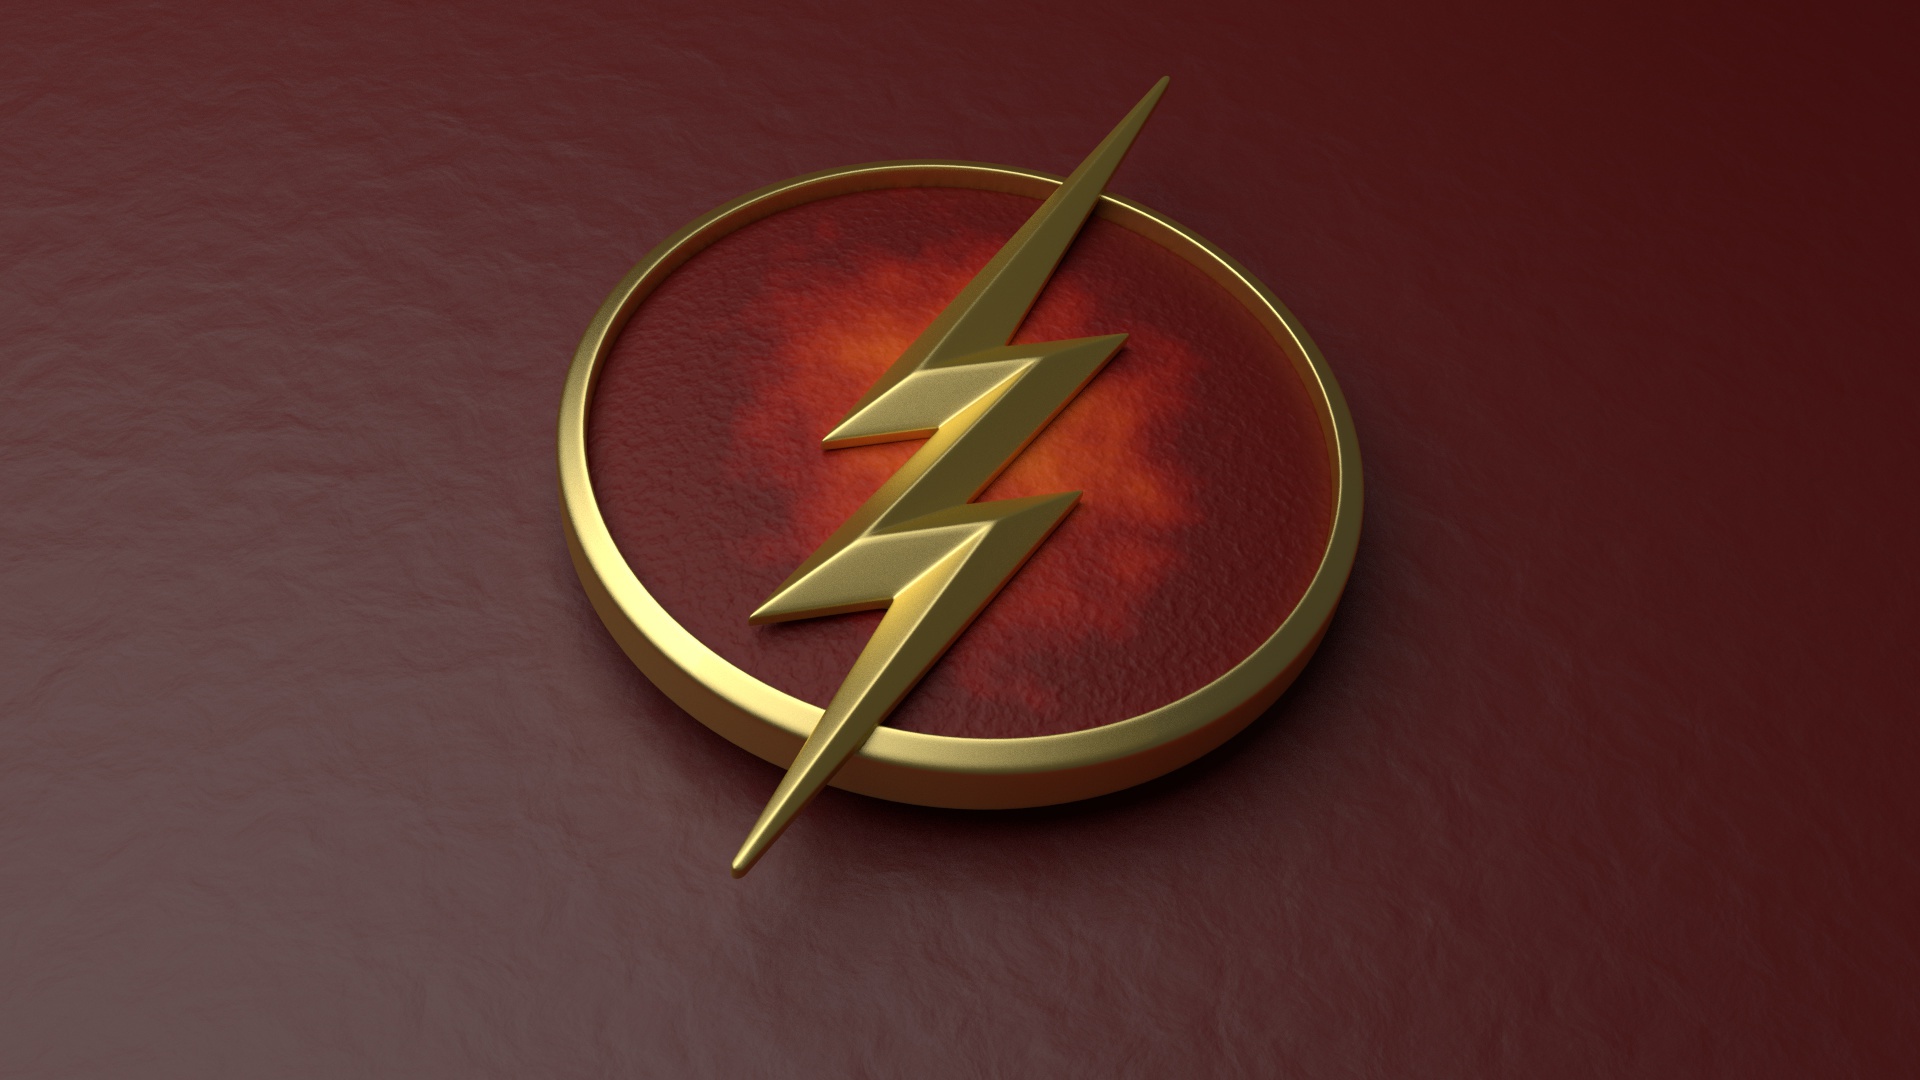 The Flash Download png